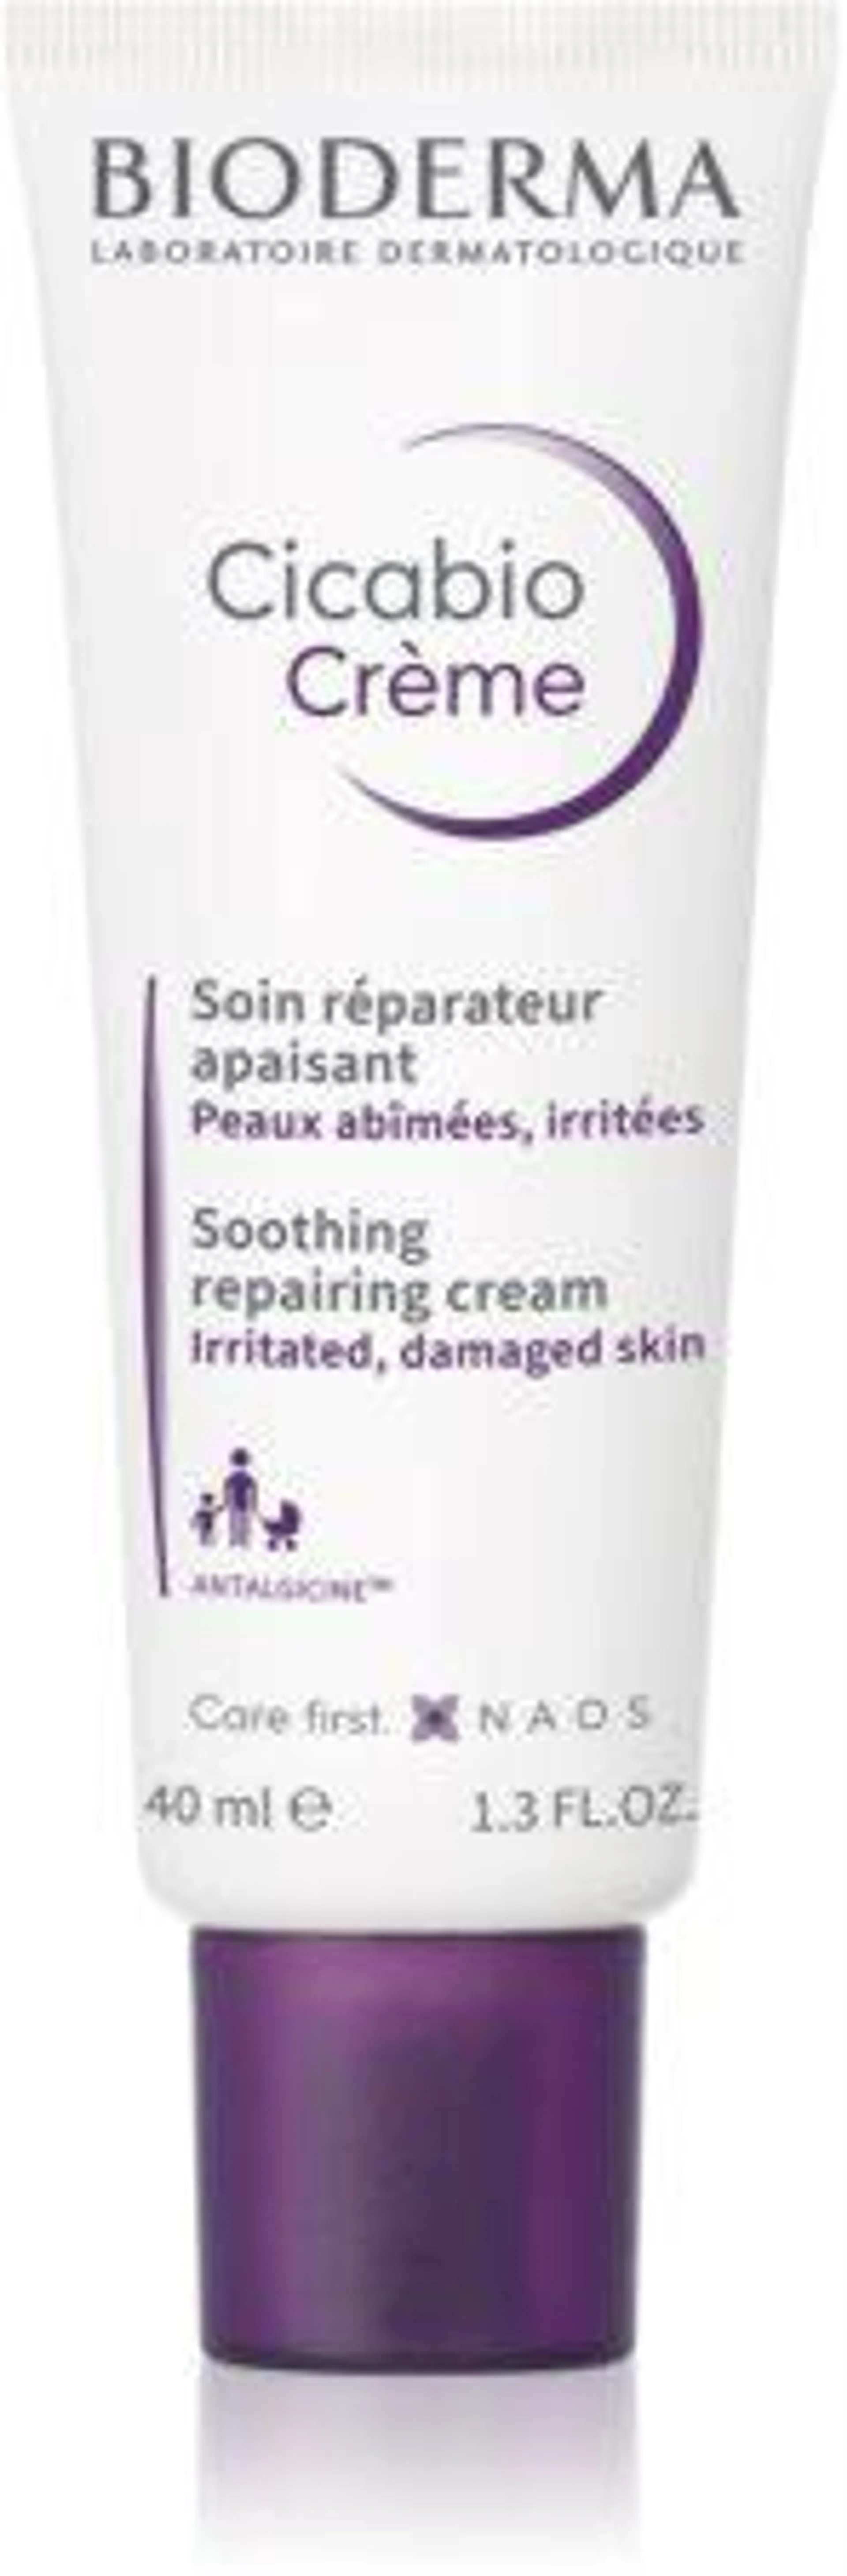 Soothing Cream Against Irritation And Itching